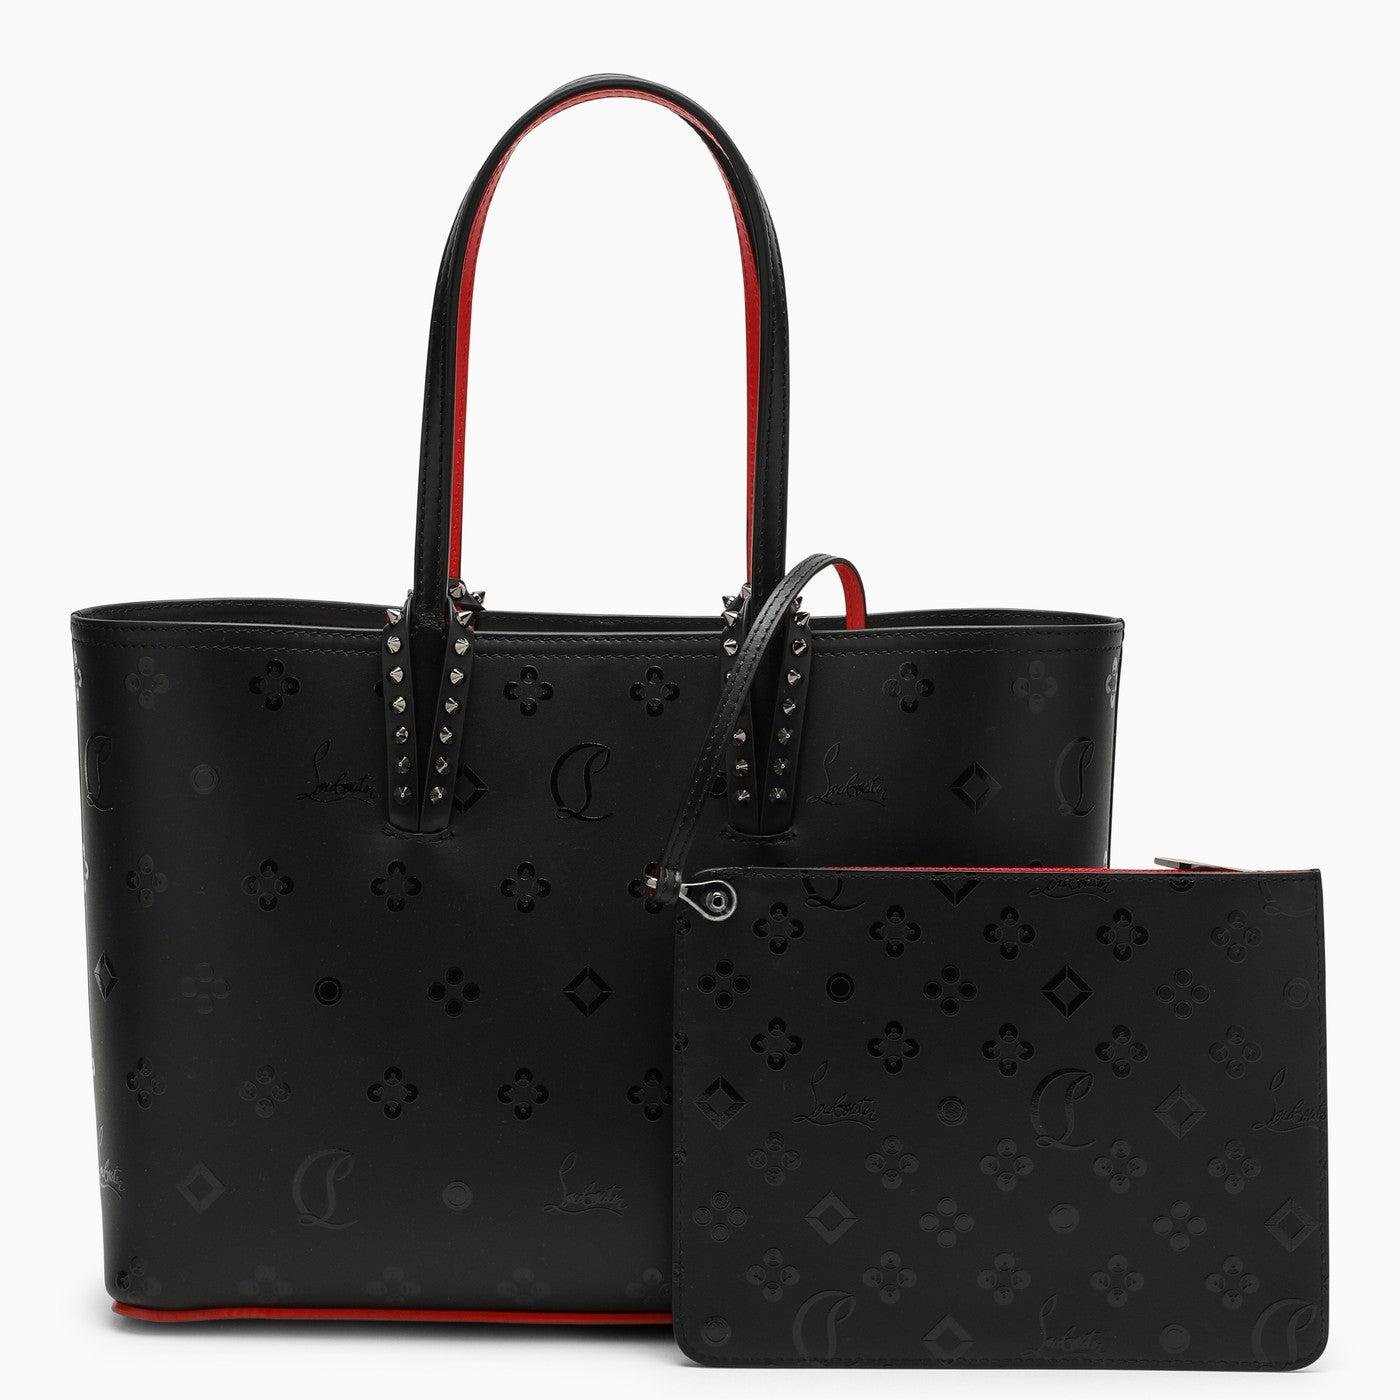 Christian Louboutin Black/red Leather Tote Bag